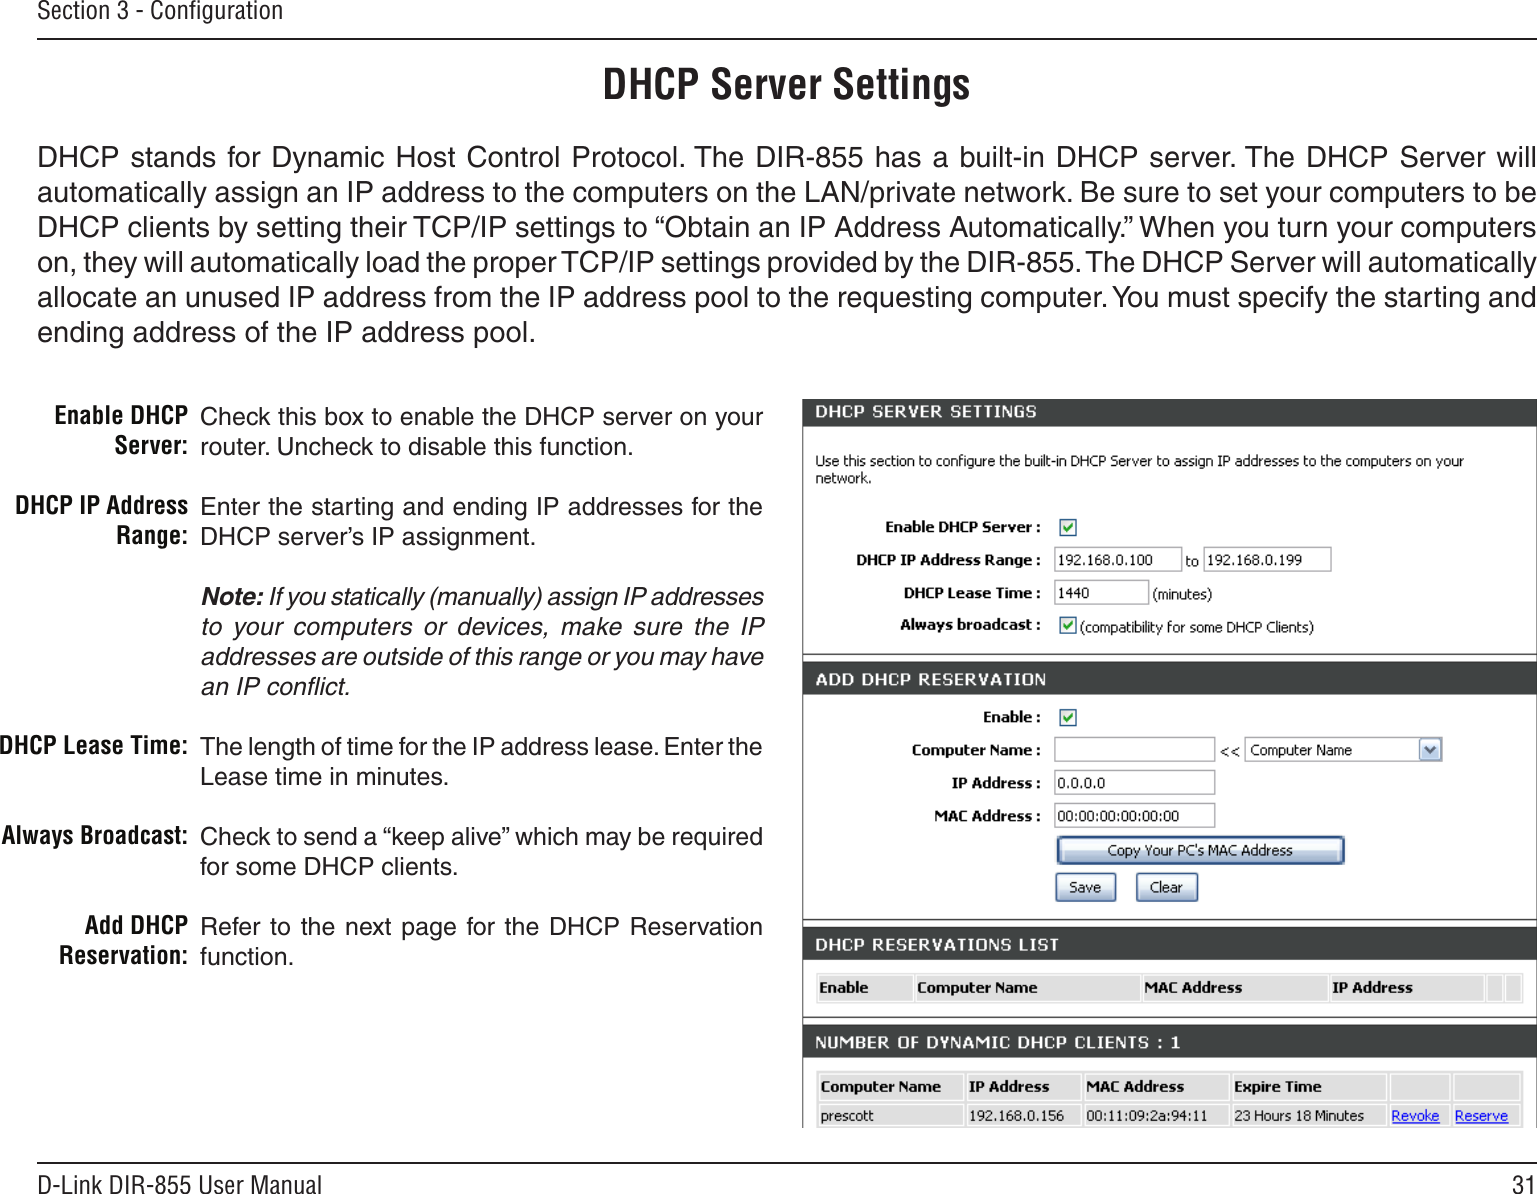 31D-Link DIR-855 User ManualSection 3 - ConﬁgurationCheck this box to enable the DHCP server on your router. Uncheck to disable this function.Enter the starting and ending IP addresses for the DHCP server’s IP assignment.Note: If you statically (manually) assign IP addresses to  your  computers  or  devices,  make  sure  the  IP addresses are outside of this range or you may have an IP conﬂict. The length of time for the IP address lease. Enter the Lease time in minutes.Check to send a “keep alive” which may be required for some DHCP clients.Refer  to  the next  page  for the  DHCP  Reservation function.Enable DHCP Server:DHCP IP Address Range:DHCP Lease Time:Always Broadcast:Add DHCP Reservation:DHCP Server SettingsDHCP stands for Dynamic Host Control Protocol. The DIR-855 has a built-in DHCP server. The DHCP Server will automatically assign an IP address to the computers on the LAN/private network. Be sure to set your computers to be DHCP clients by setting their TCP/IP settings to “Obtain an IP Address Automatically.” When you turn your computers on, they will automatically load the proper TCP/IP settings provided by the DIR-855. The DHCP Server will automatically allocate an unused IP address from the IP address pool to the requesting computer. You must specify the starting and ending address of the IP address pool.